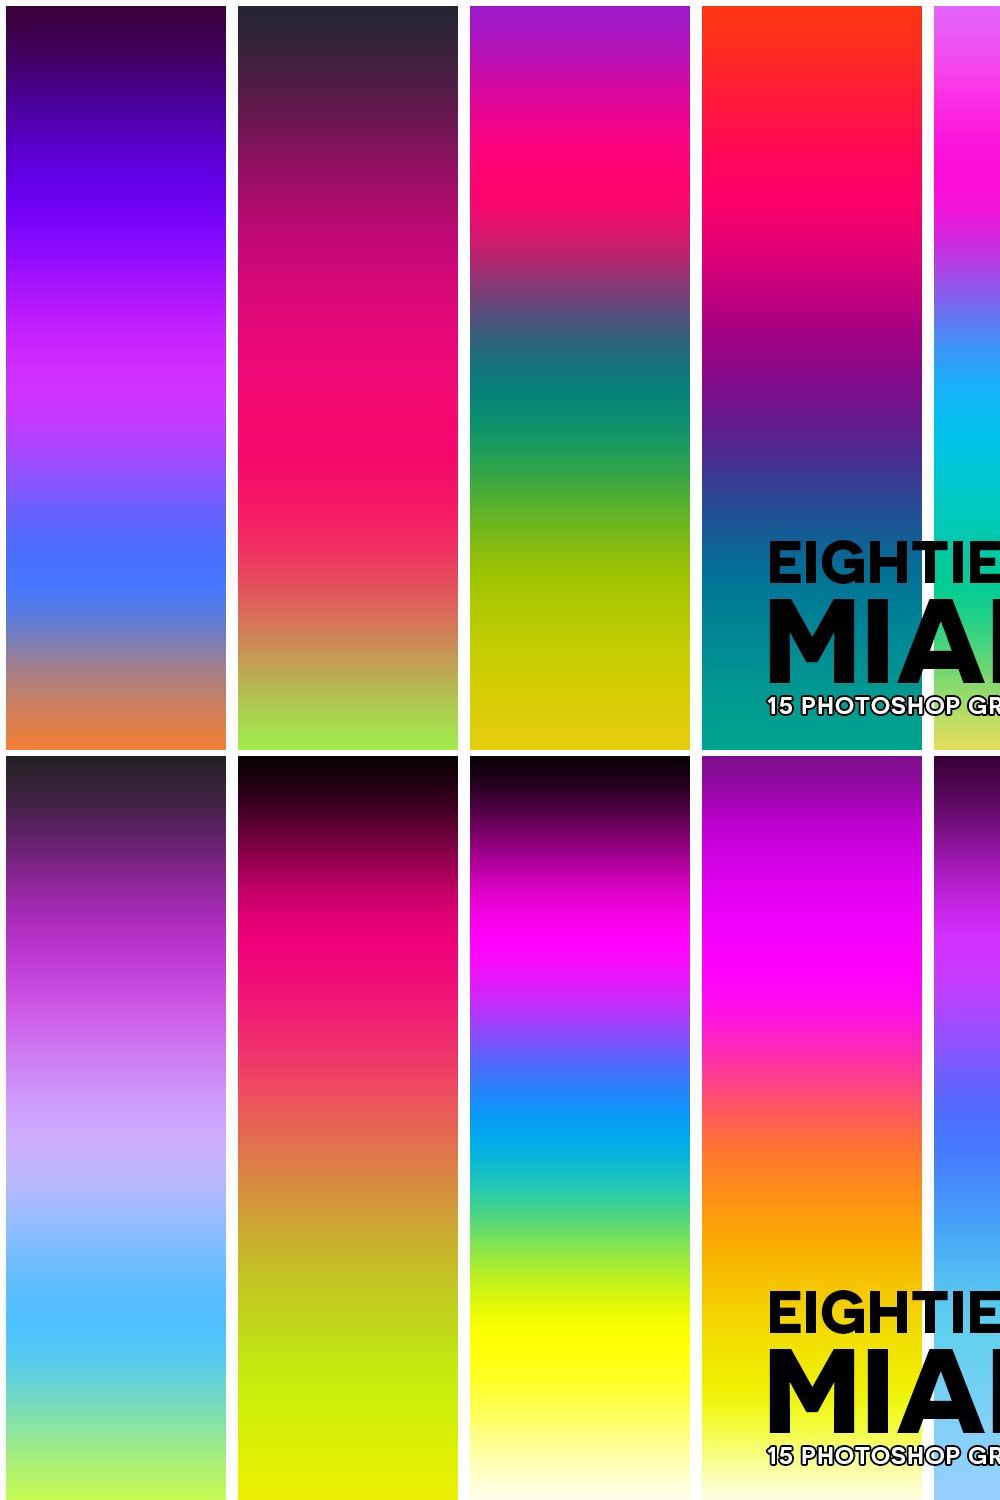 Eighties in Miami pinterest preview image.